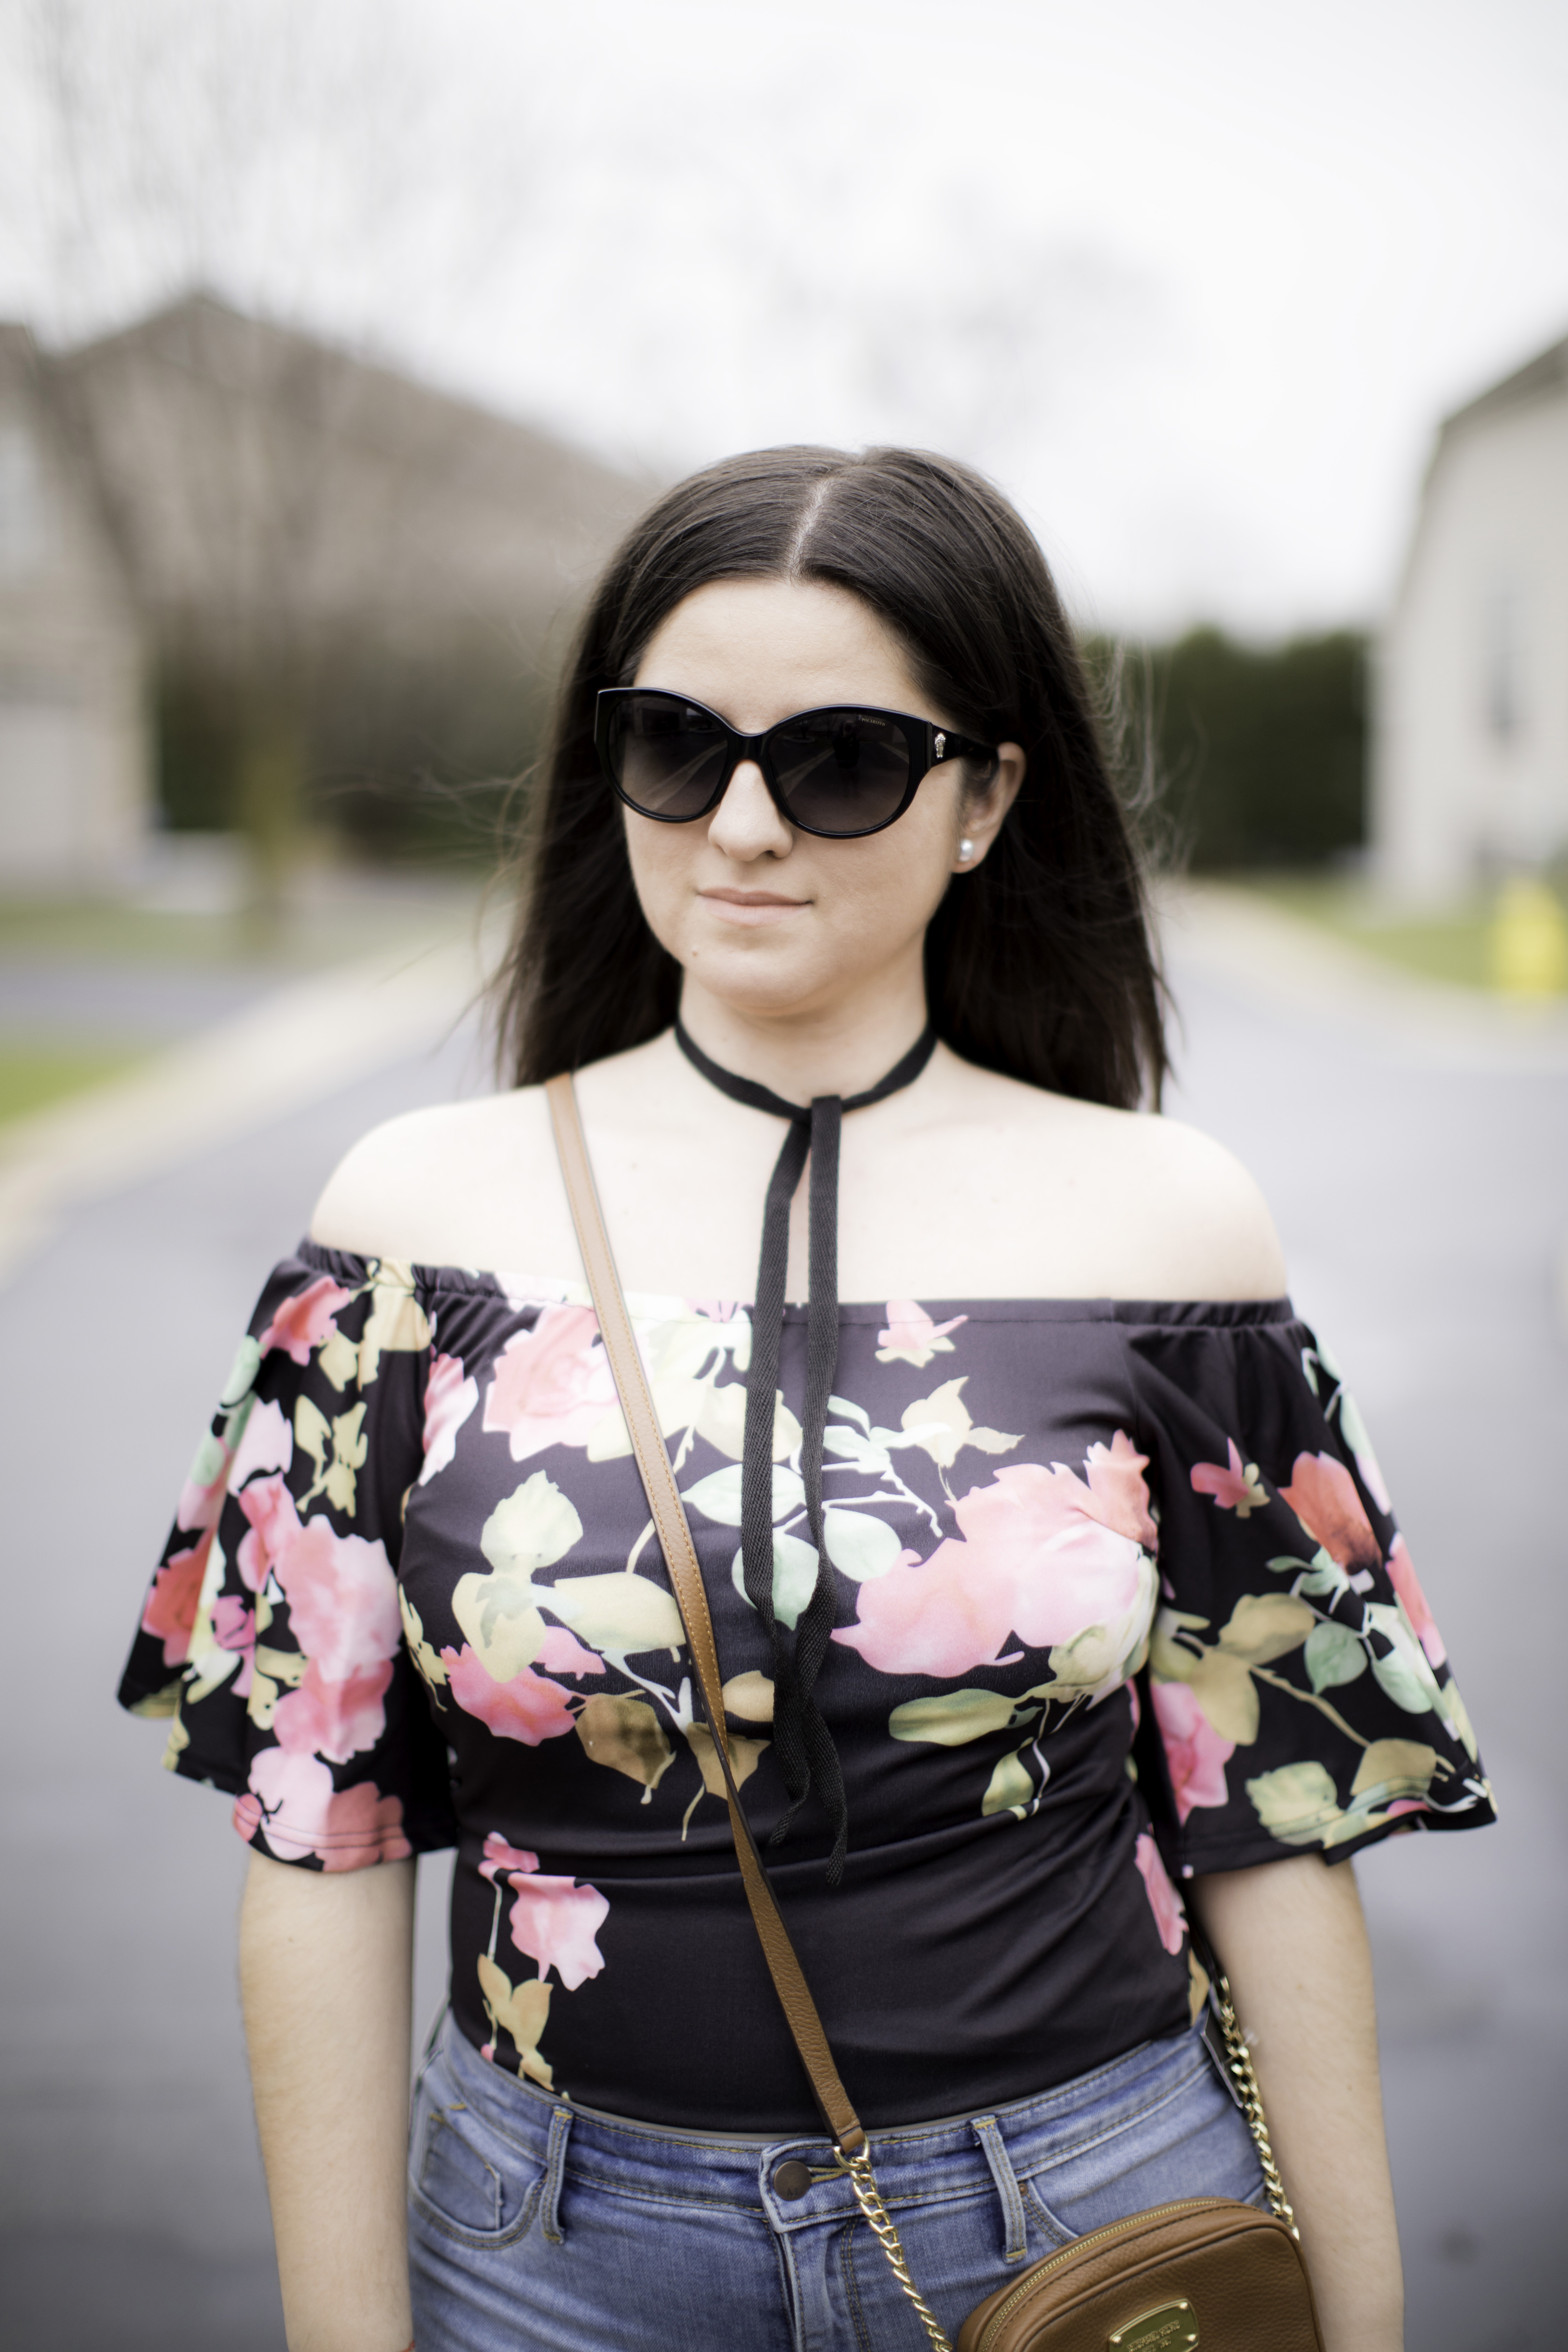 How to style an off the shoulder top for a date night, floral top, skinny high waist jeans, bailylamb, chicagoblogger, rockfordblogger